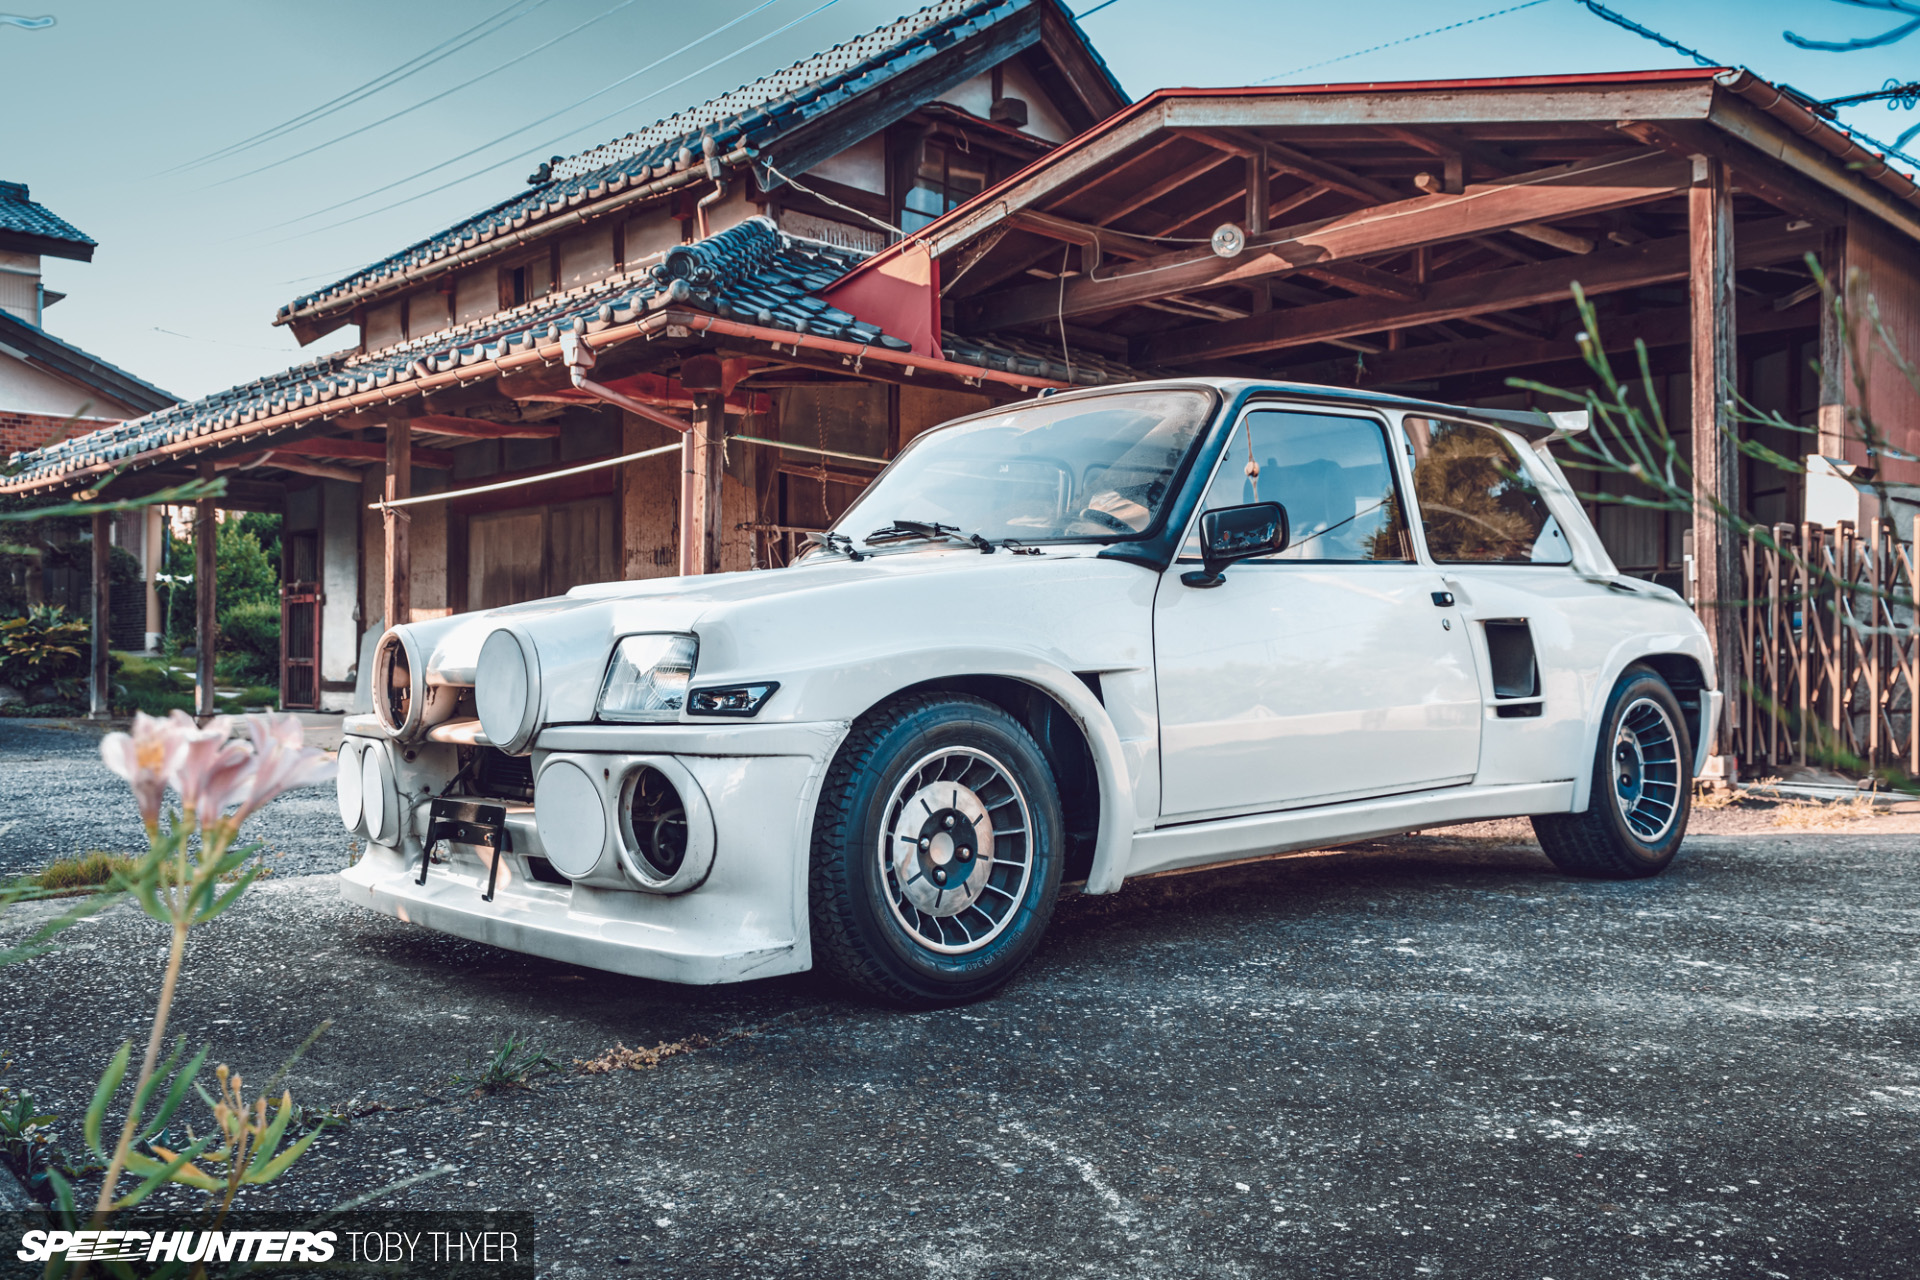 How Cool Is This R5 Turbo Resto Project? Speedhunters